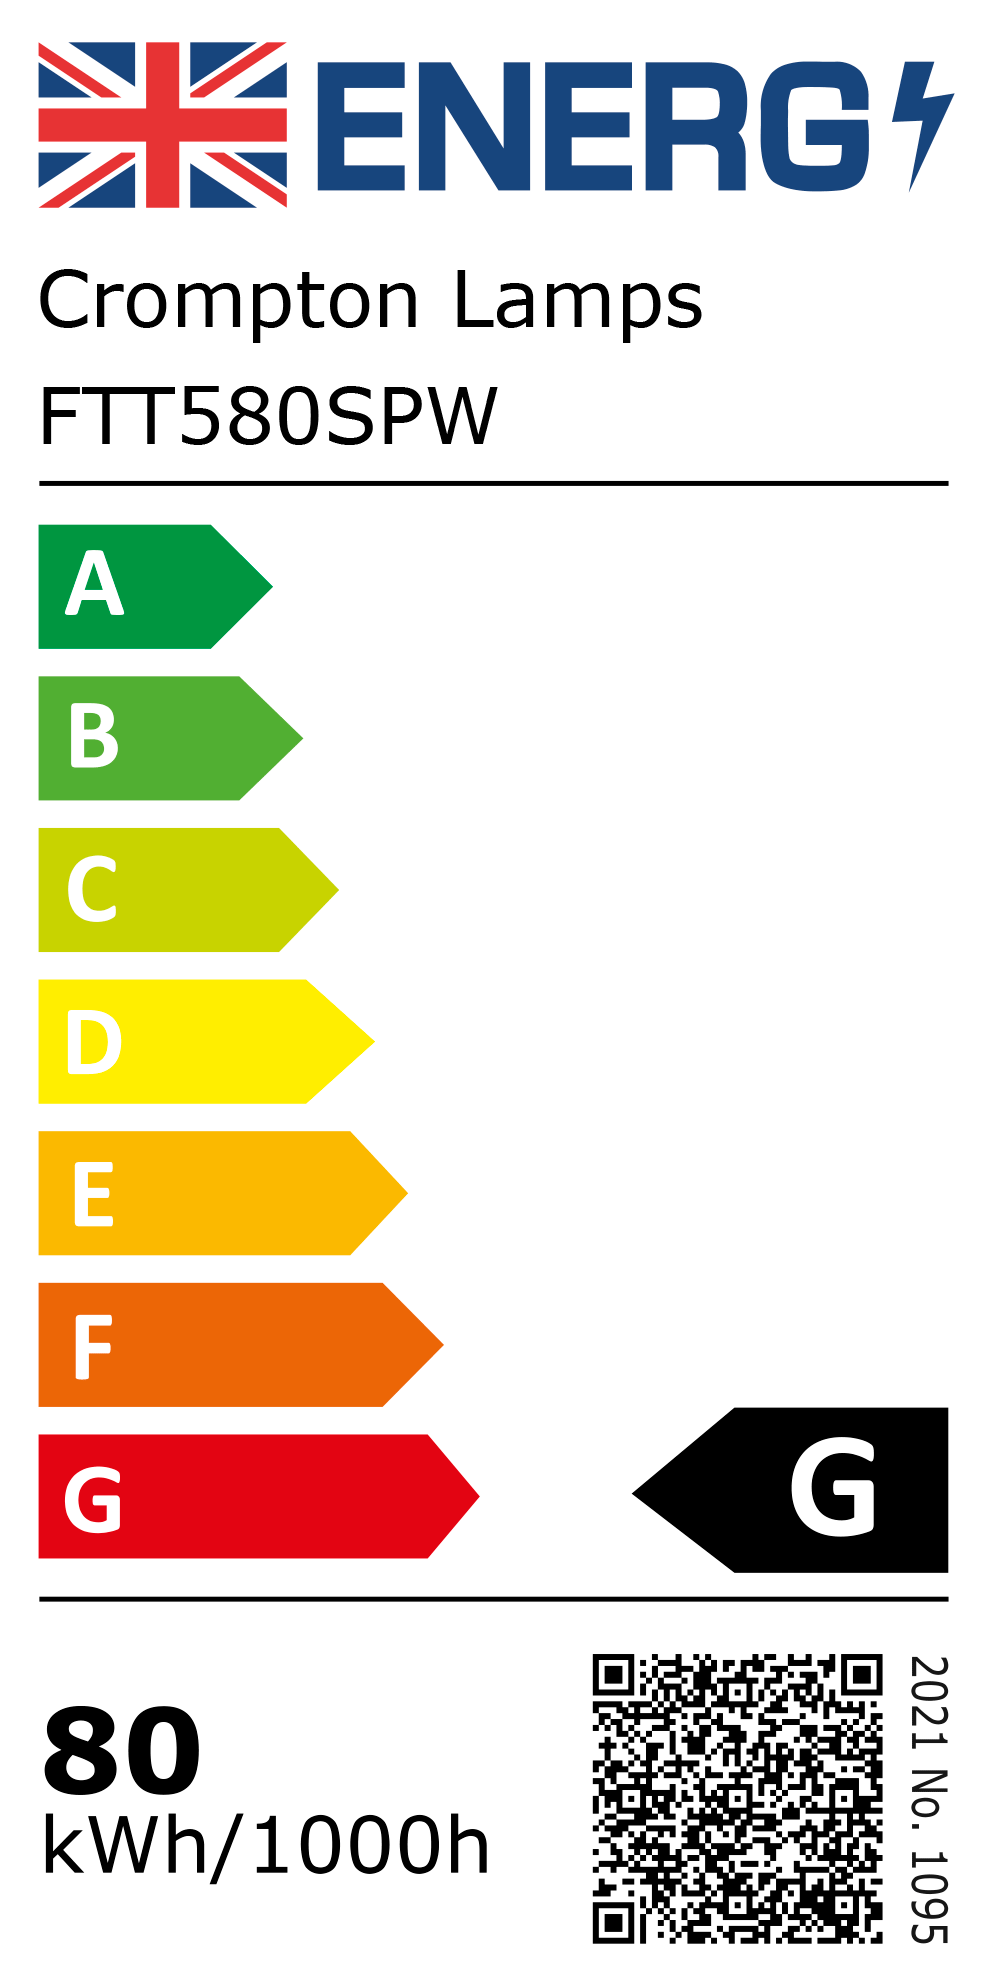 New 2021 Energy Rating Label: Stock Code FTT580SPW